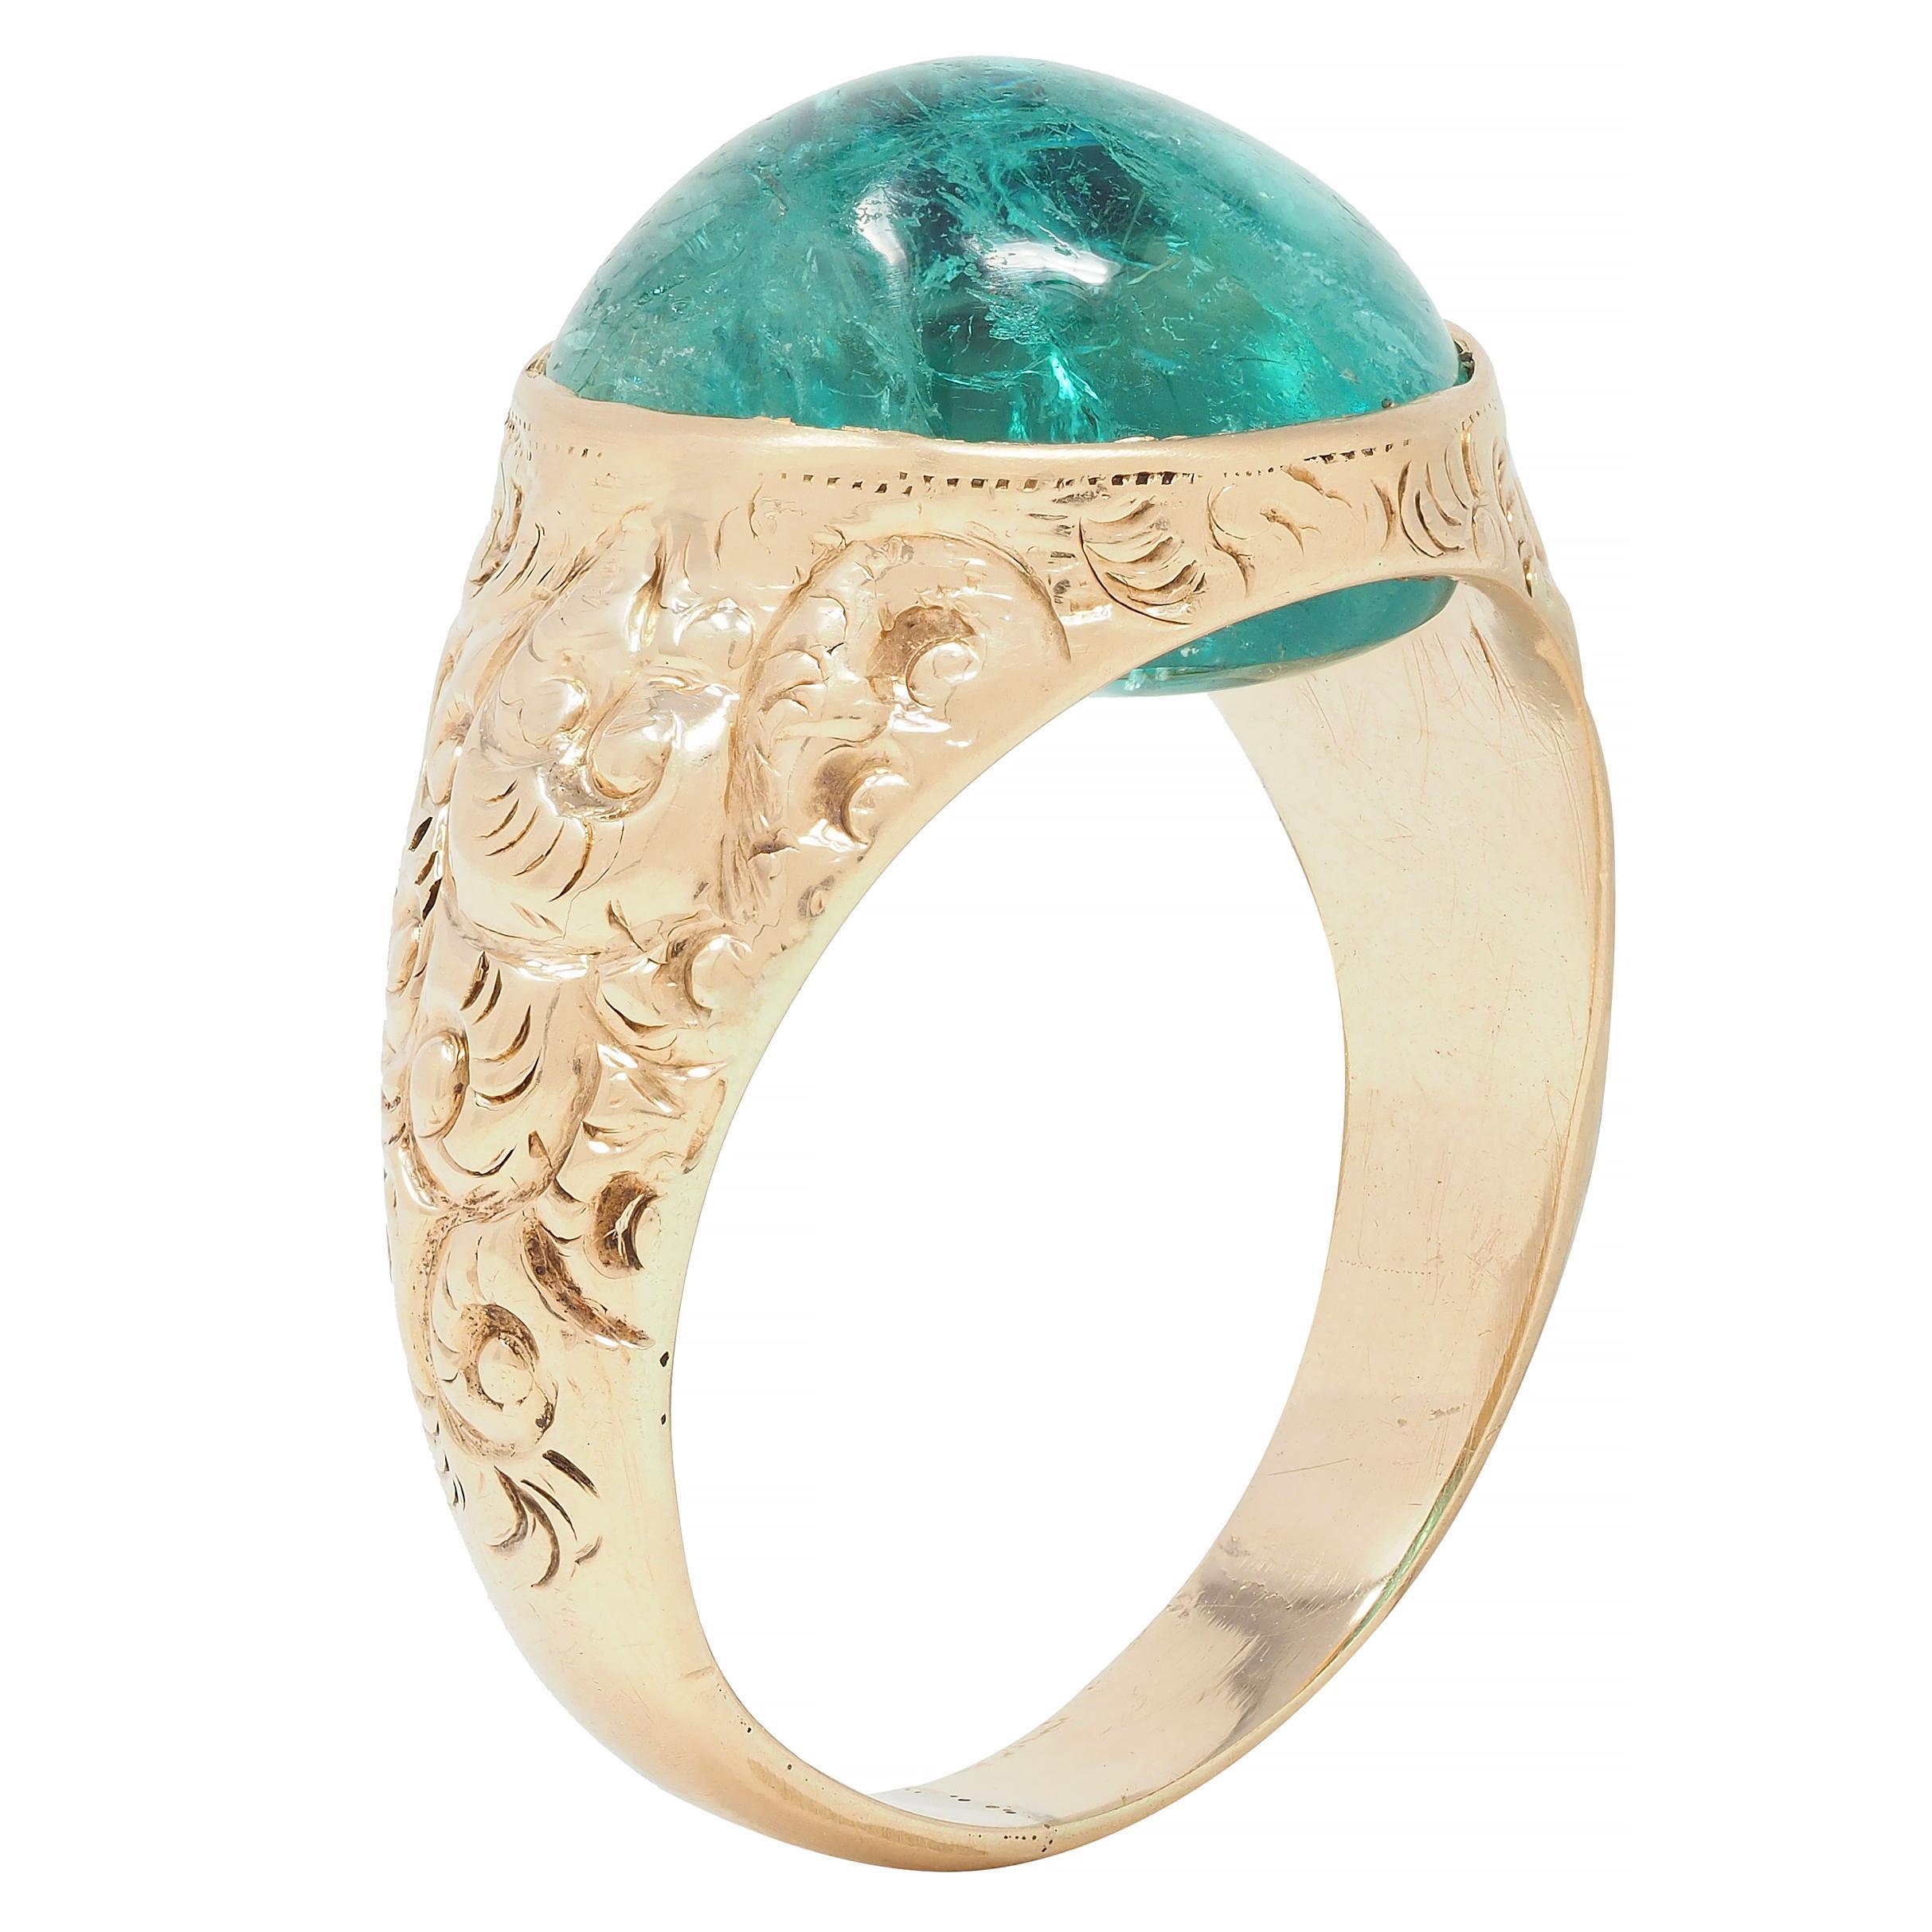 Centering an oval-shaped emerald domed double cabochon weighing approximately 10.16 carats 
Translucent medium bluish-green in color with natural inclusions 
Bezel set with a grooved scroll motif surround
Tested as 14 karat gold 
Circa: 1880s
Ring